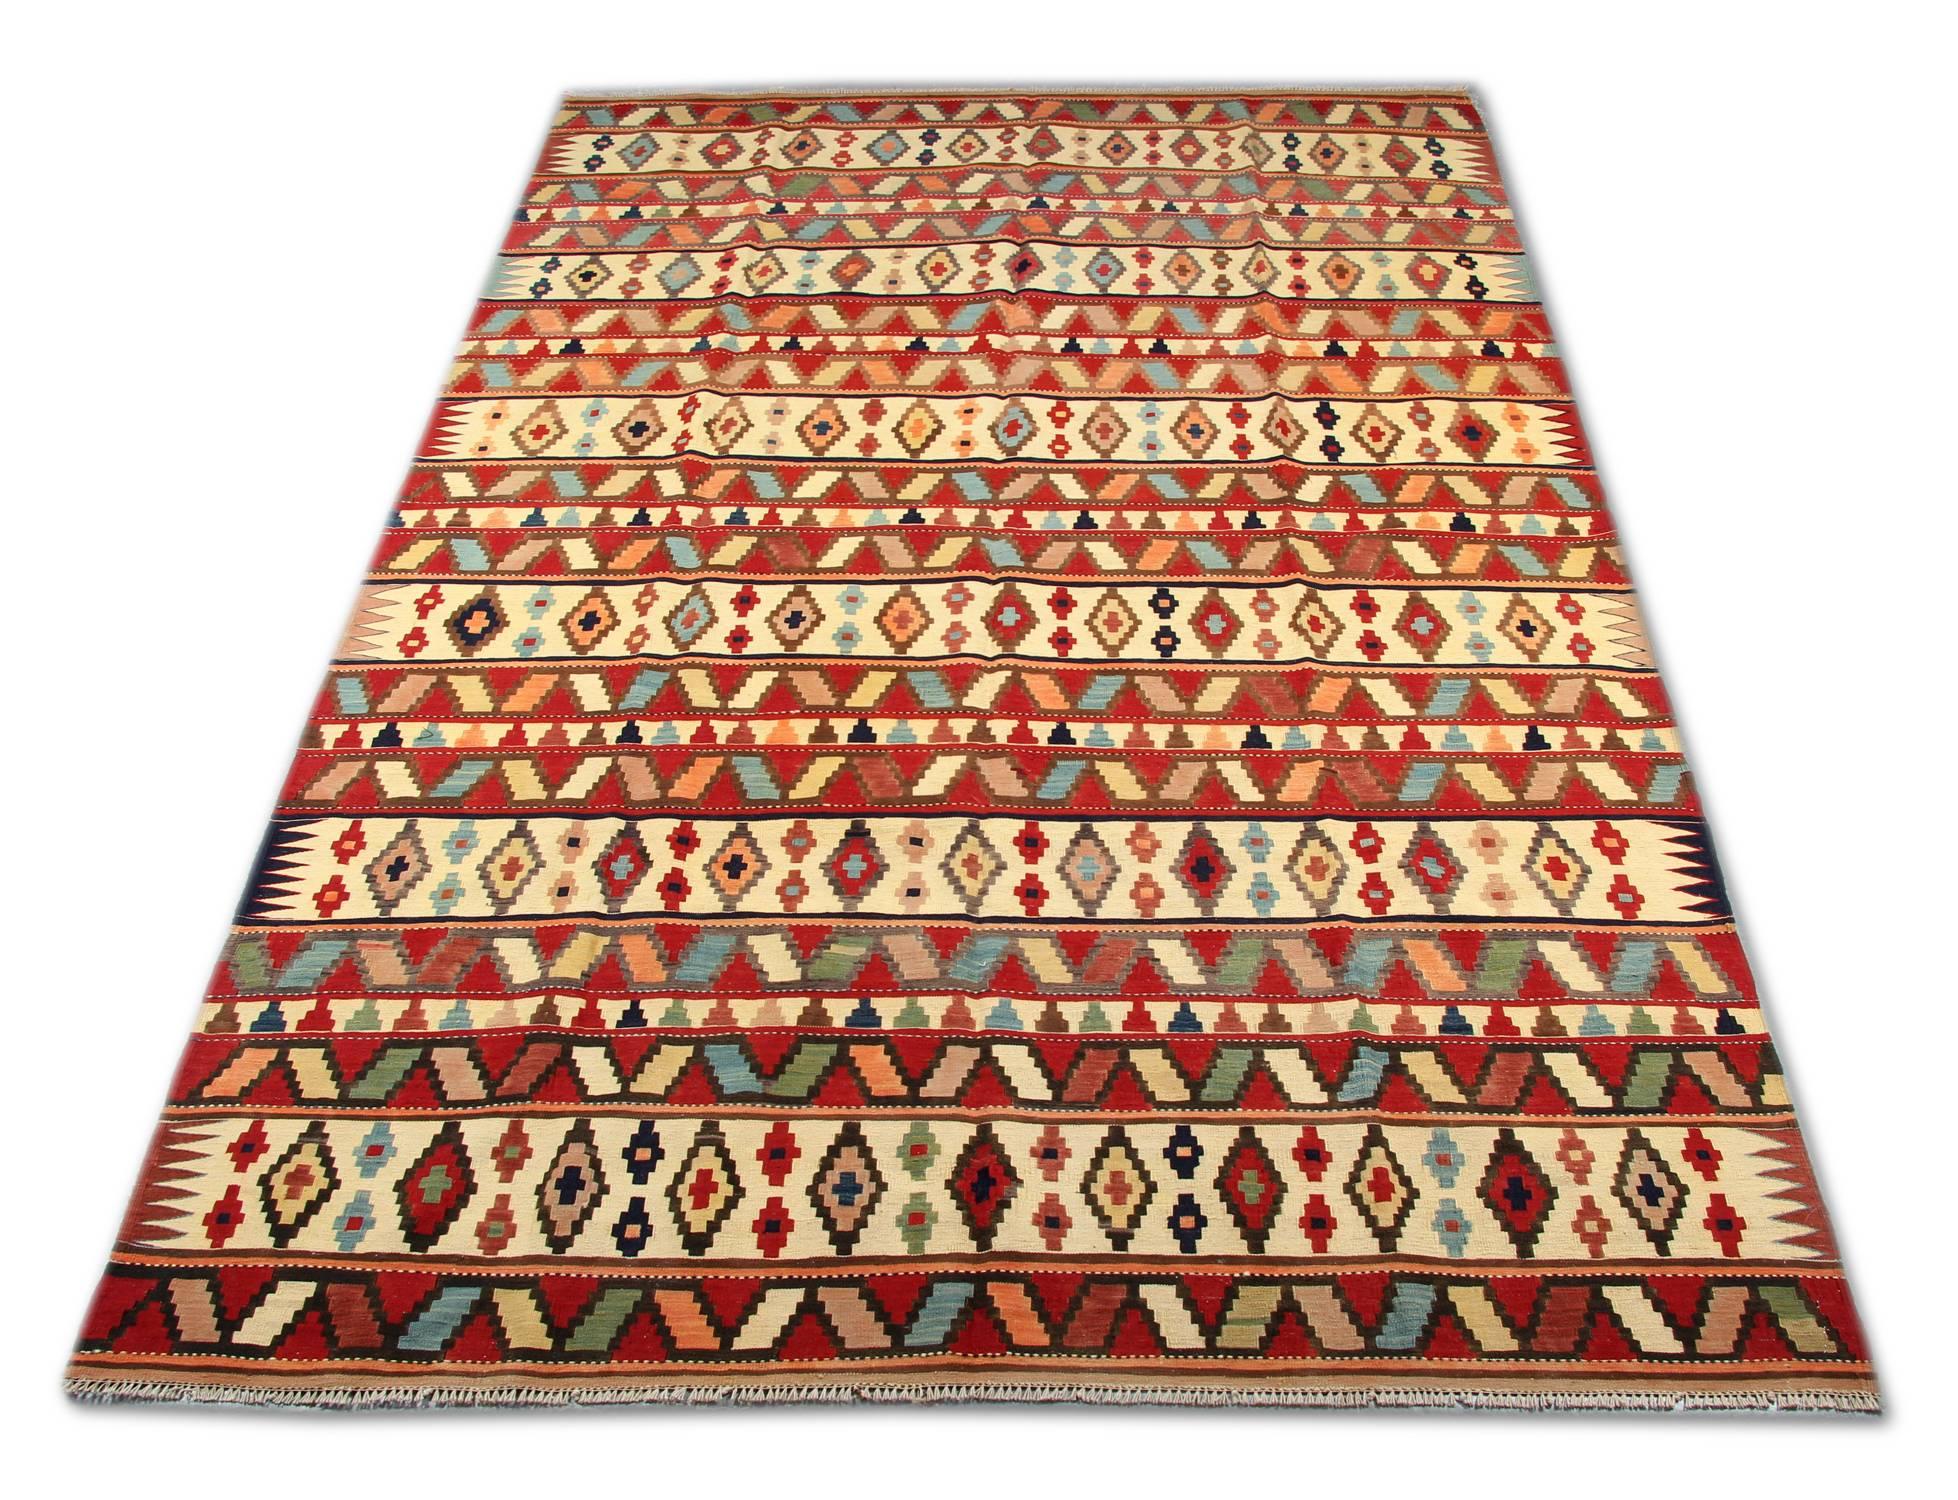 This handmade carpet colourful Caucasian carpet oriental rug is woven by very skilled weavers in Azerbaijan, who used the highest quality wool and cotton. The flat-weave rug has ivory, orange Salmon, green, white, pink, black and brown colours. The